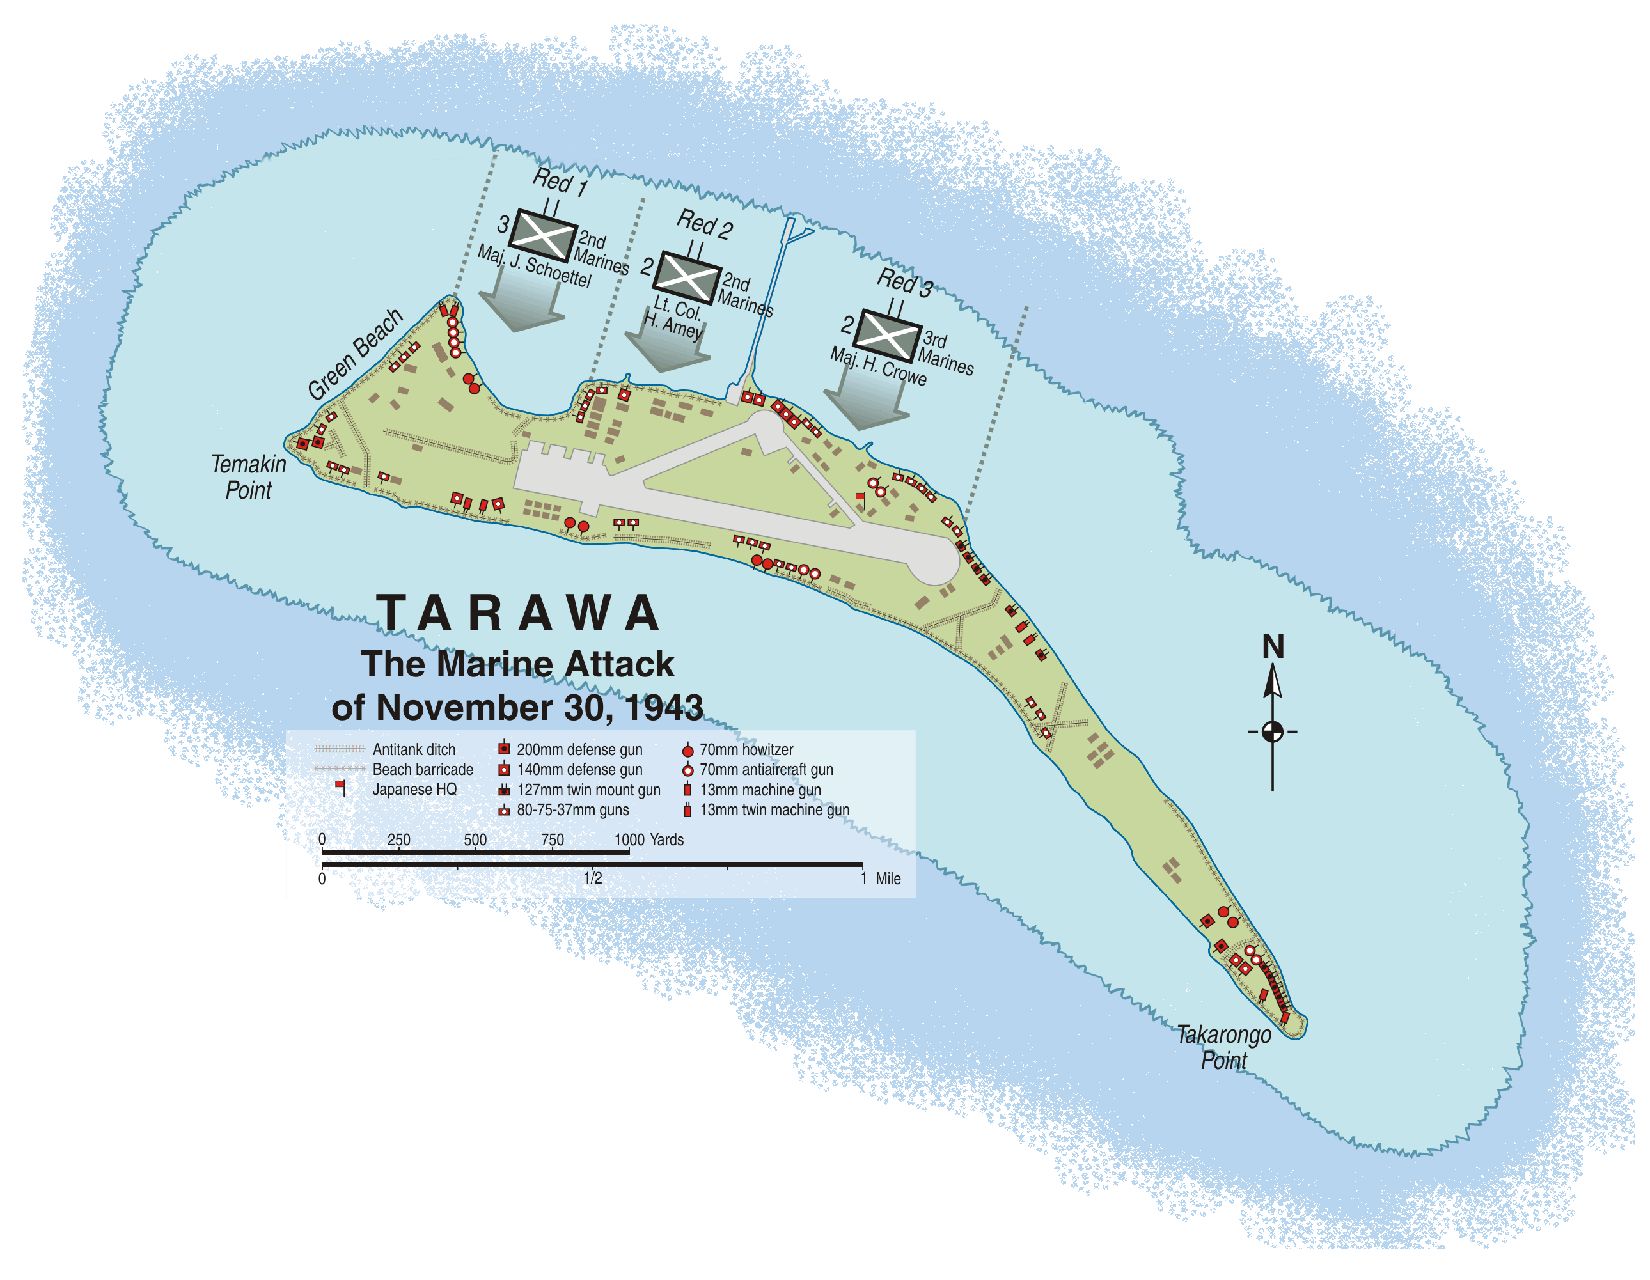 The three main invasion beaches (Red 1, 2, and 3) were located along the northern coast of Betio, the main island of Tarawa atoll, and within close proximity of the airfield. 